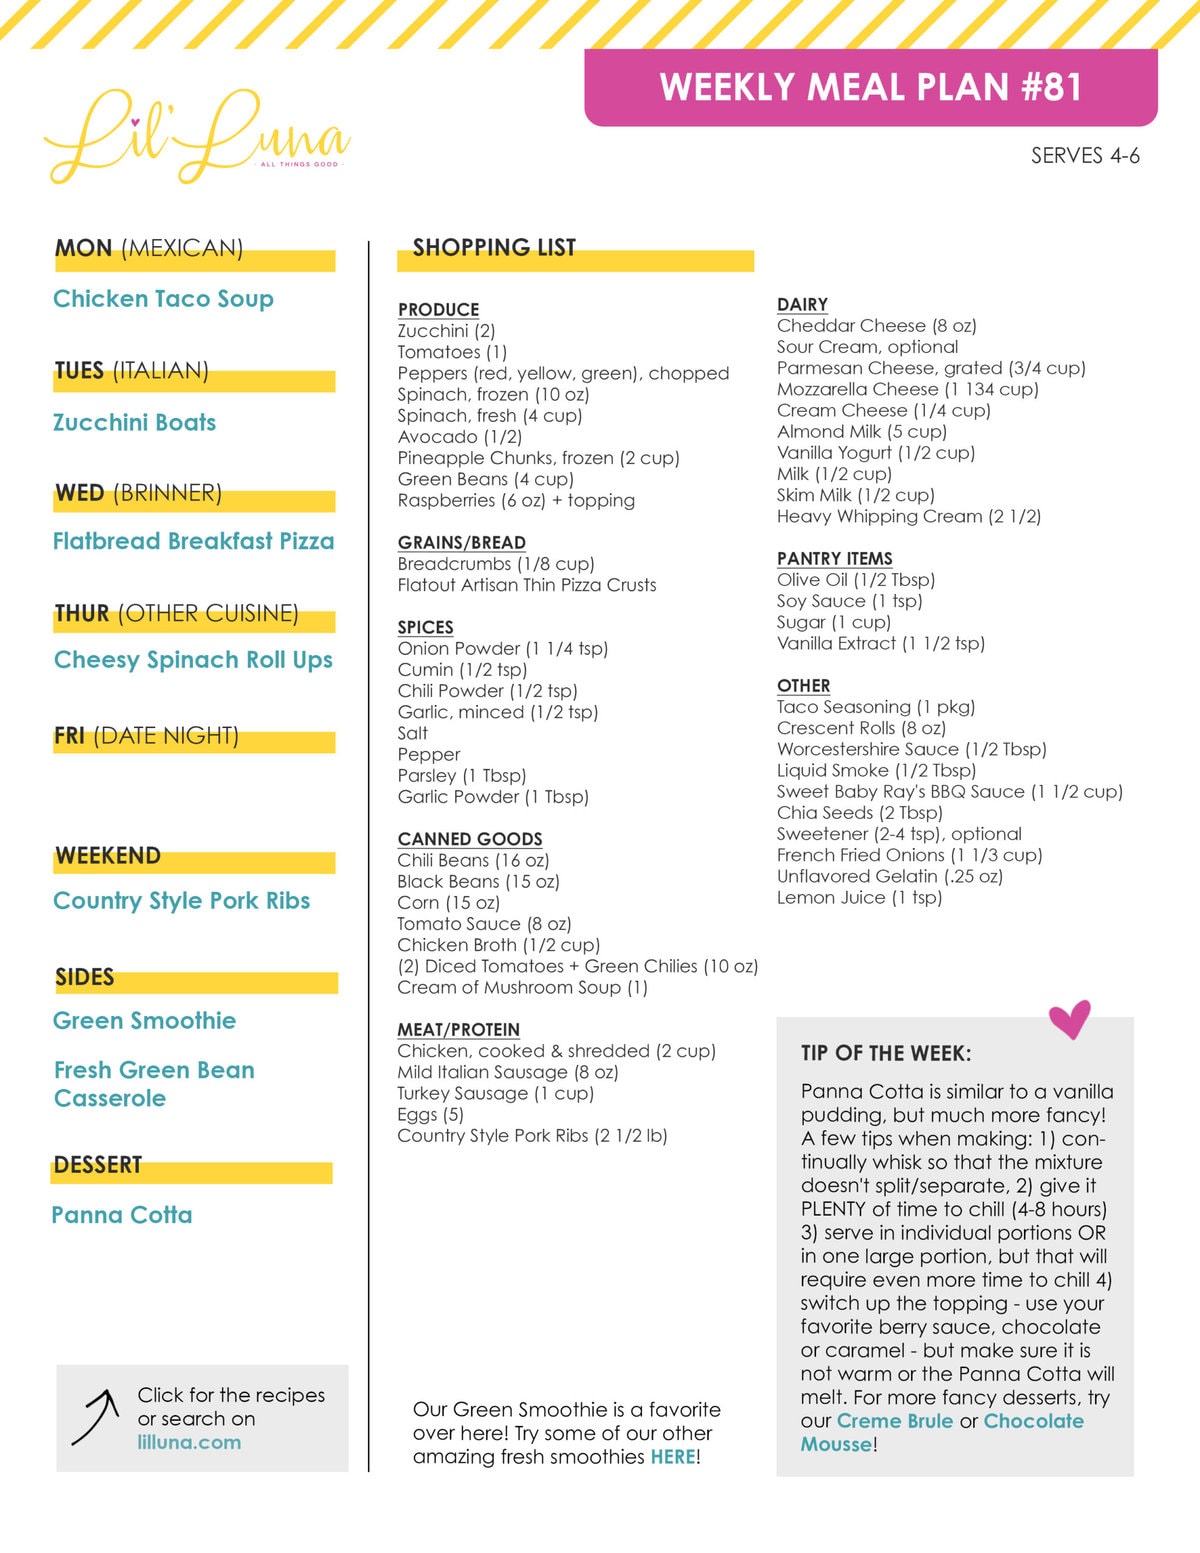 Printable version of Meal Plan #81 with grocery list.